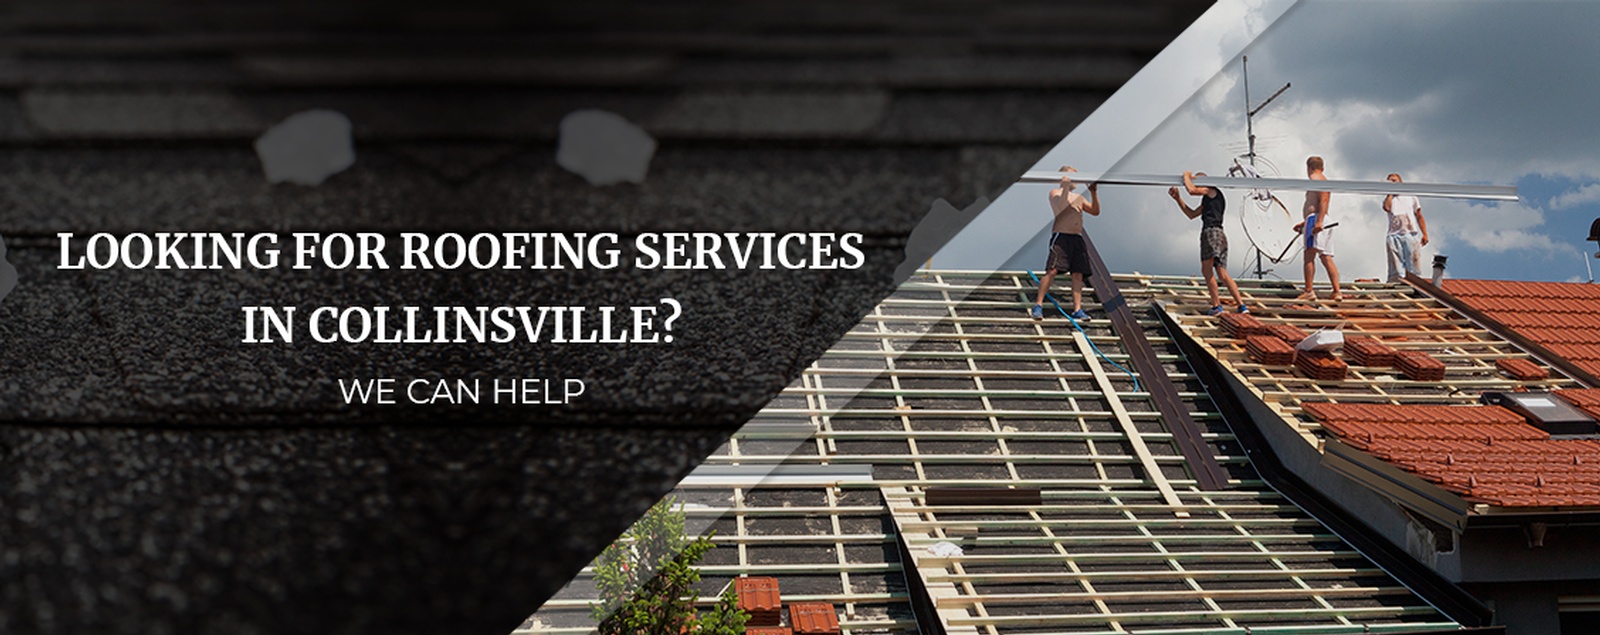 Looking For Roofing Services In Collinsville We Can Help